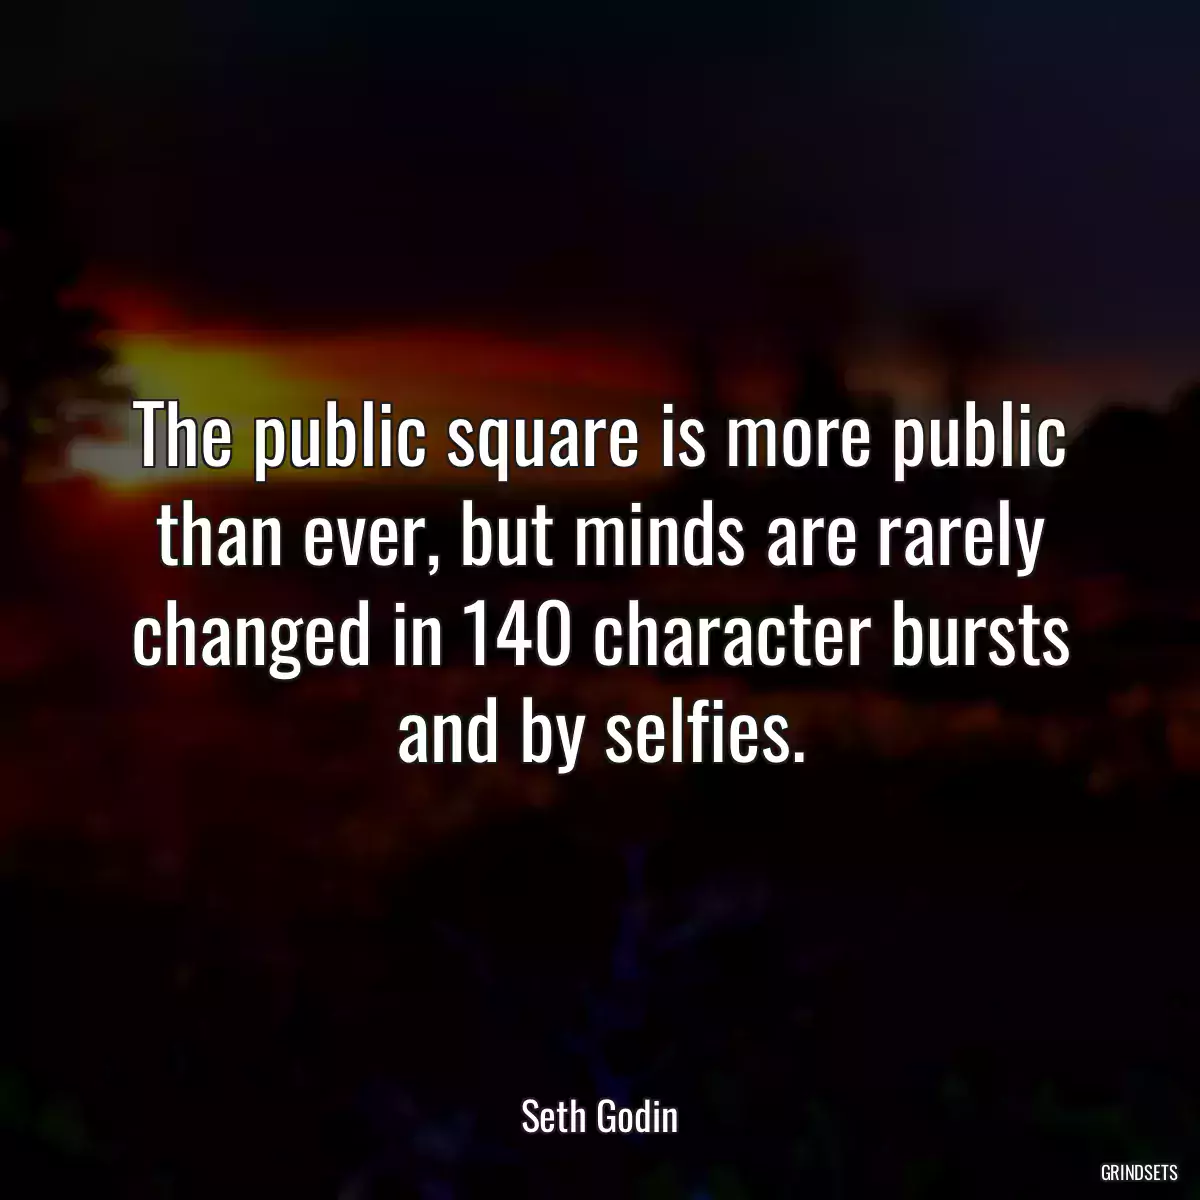 The public square is more public than ever, but minds are rarely changed in 140 character bursts and by selfies.